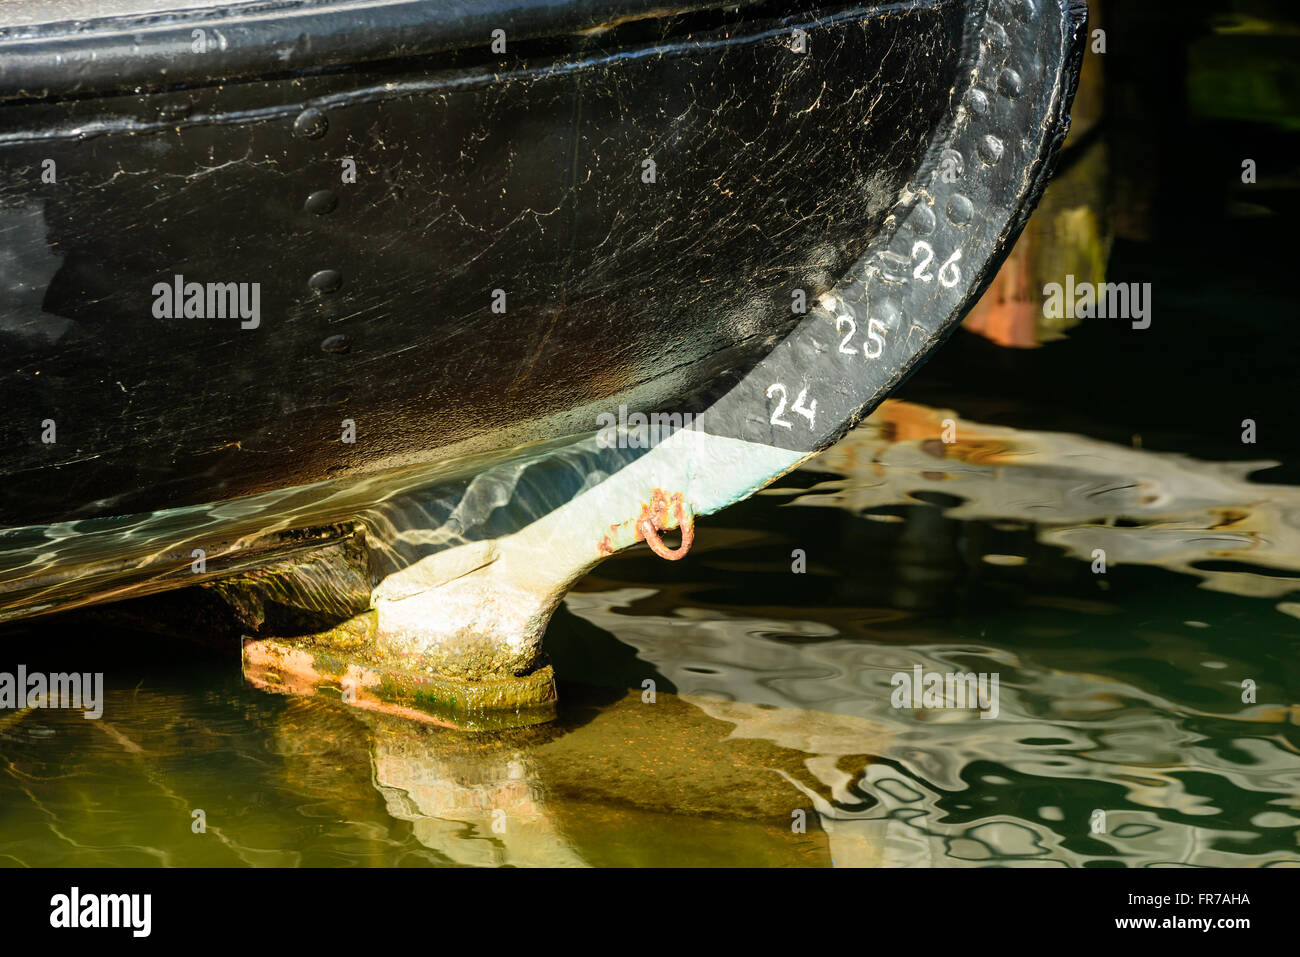 The stern of a black painted boat. The keel has depth markers in numbers. Water is transparent and calm. Stock Photo